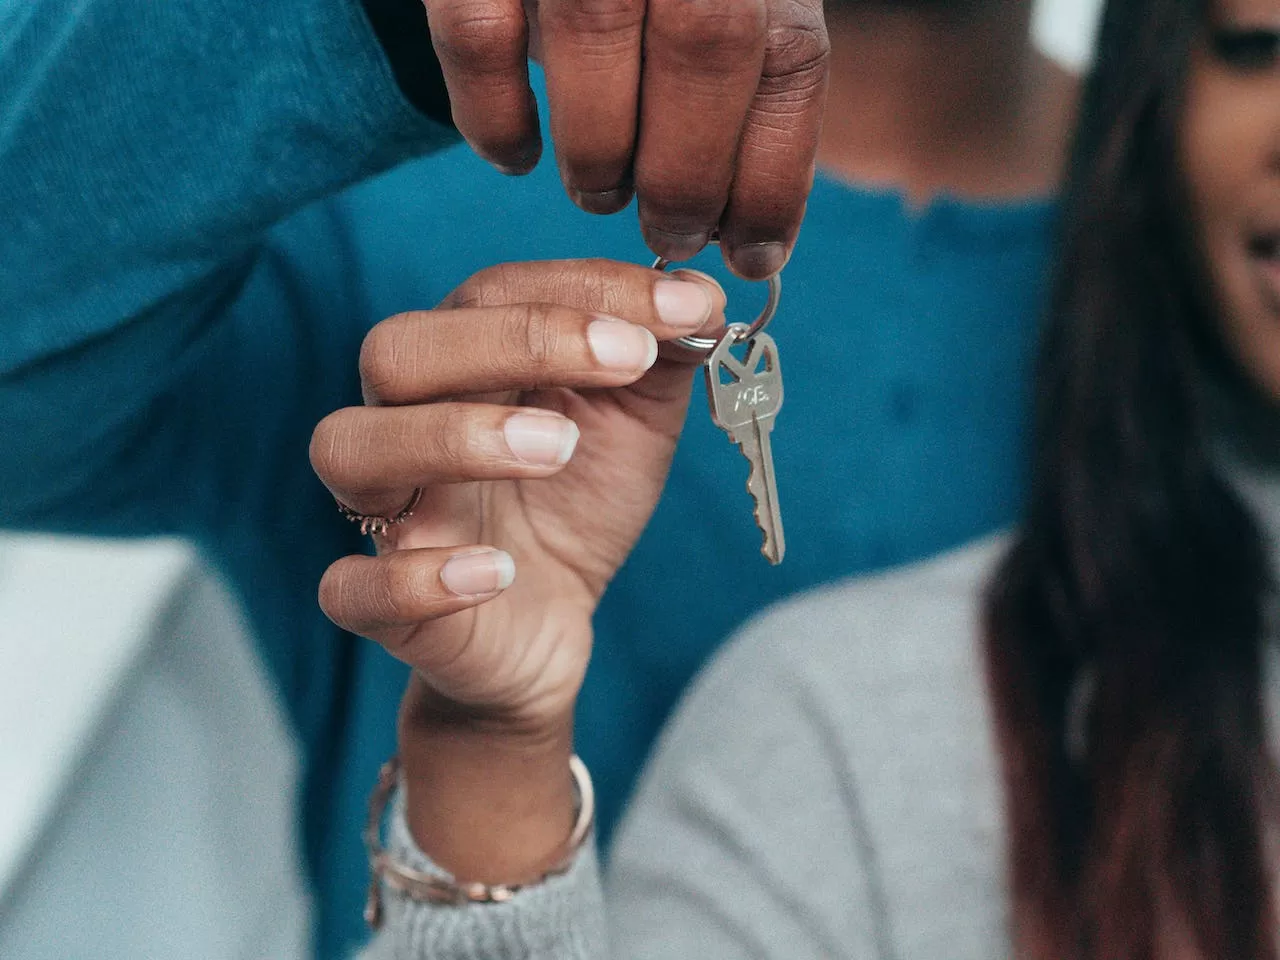 People Holding a Key